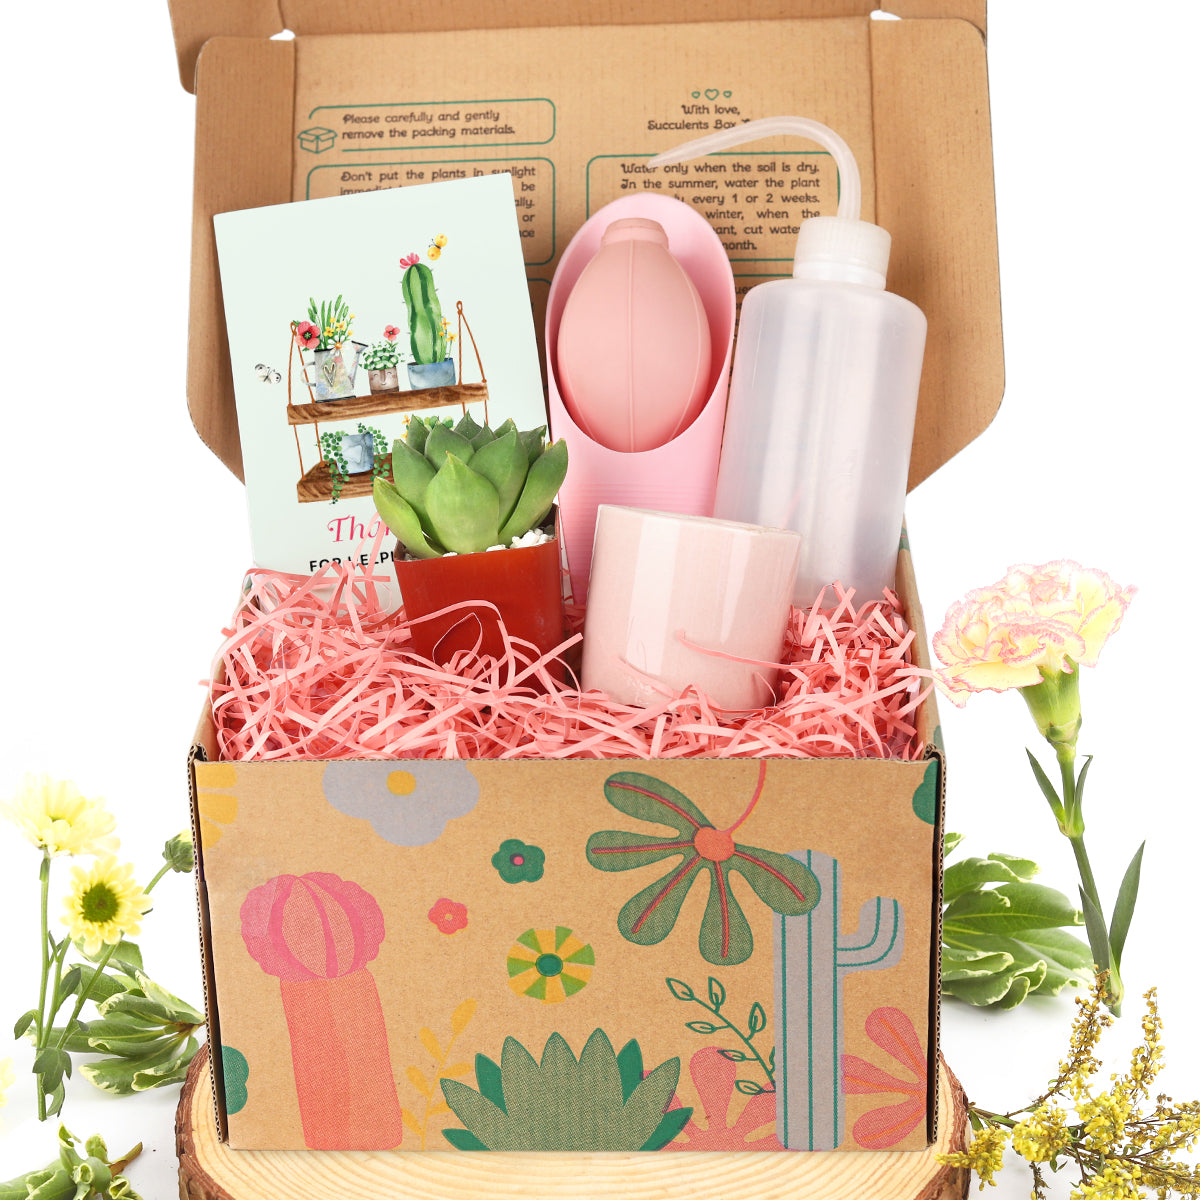 Beginner Kit Gift Box for sale, Succulent Starter Kit, Succulent Kit for Beginner, Best Succulent Gift for Beginner, Succulent Beginner Kit, EcoFriendly Succulent Gift Box for Employee, Corporate Gift Succulents For Sale Online, birthday gift ideas, Mother's Day gift box ideas